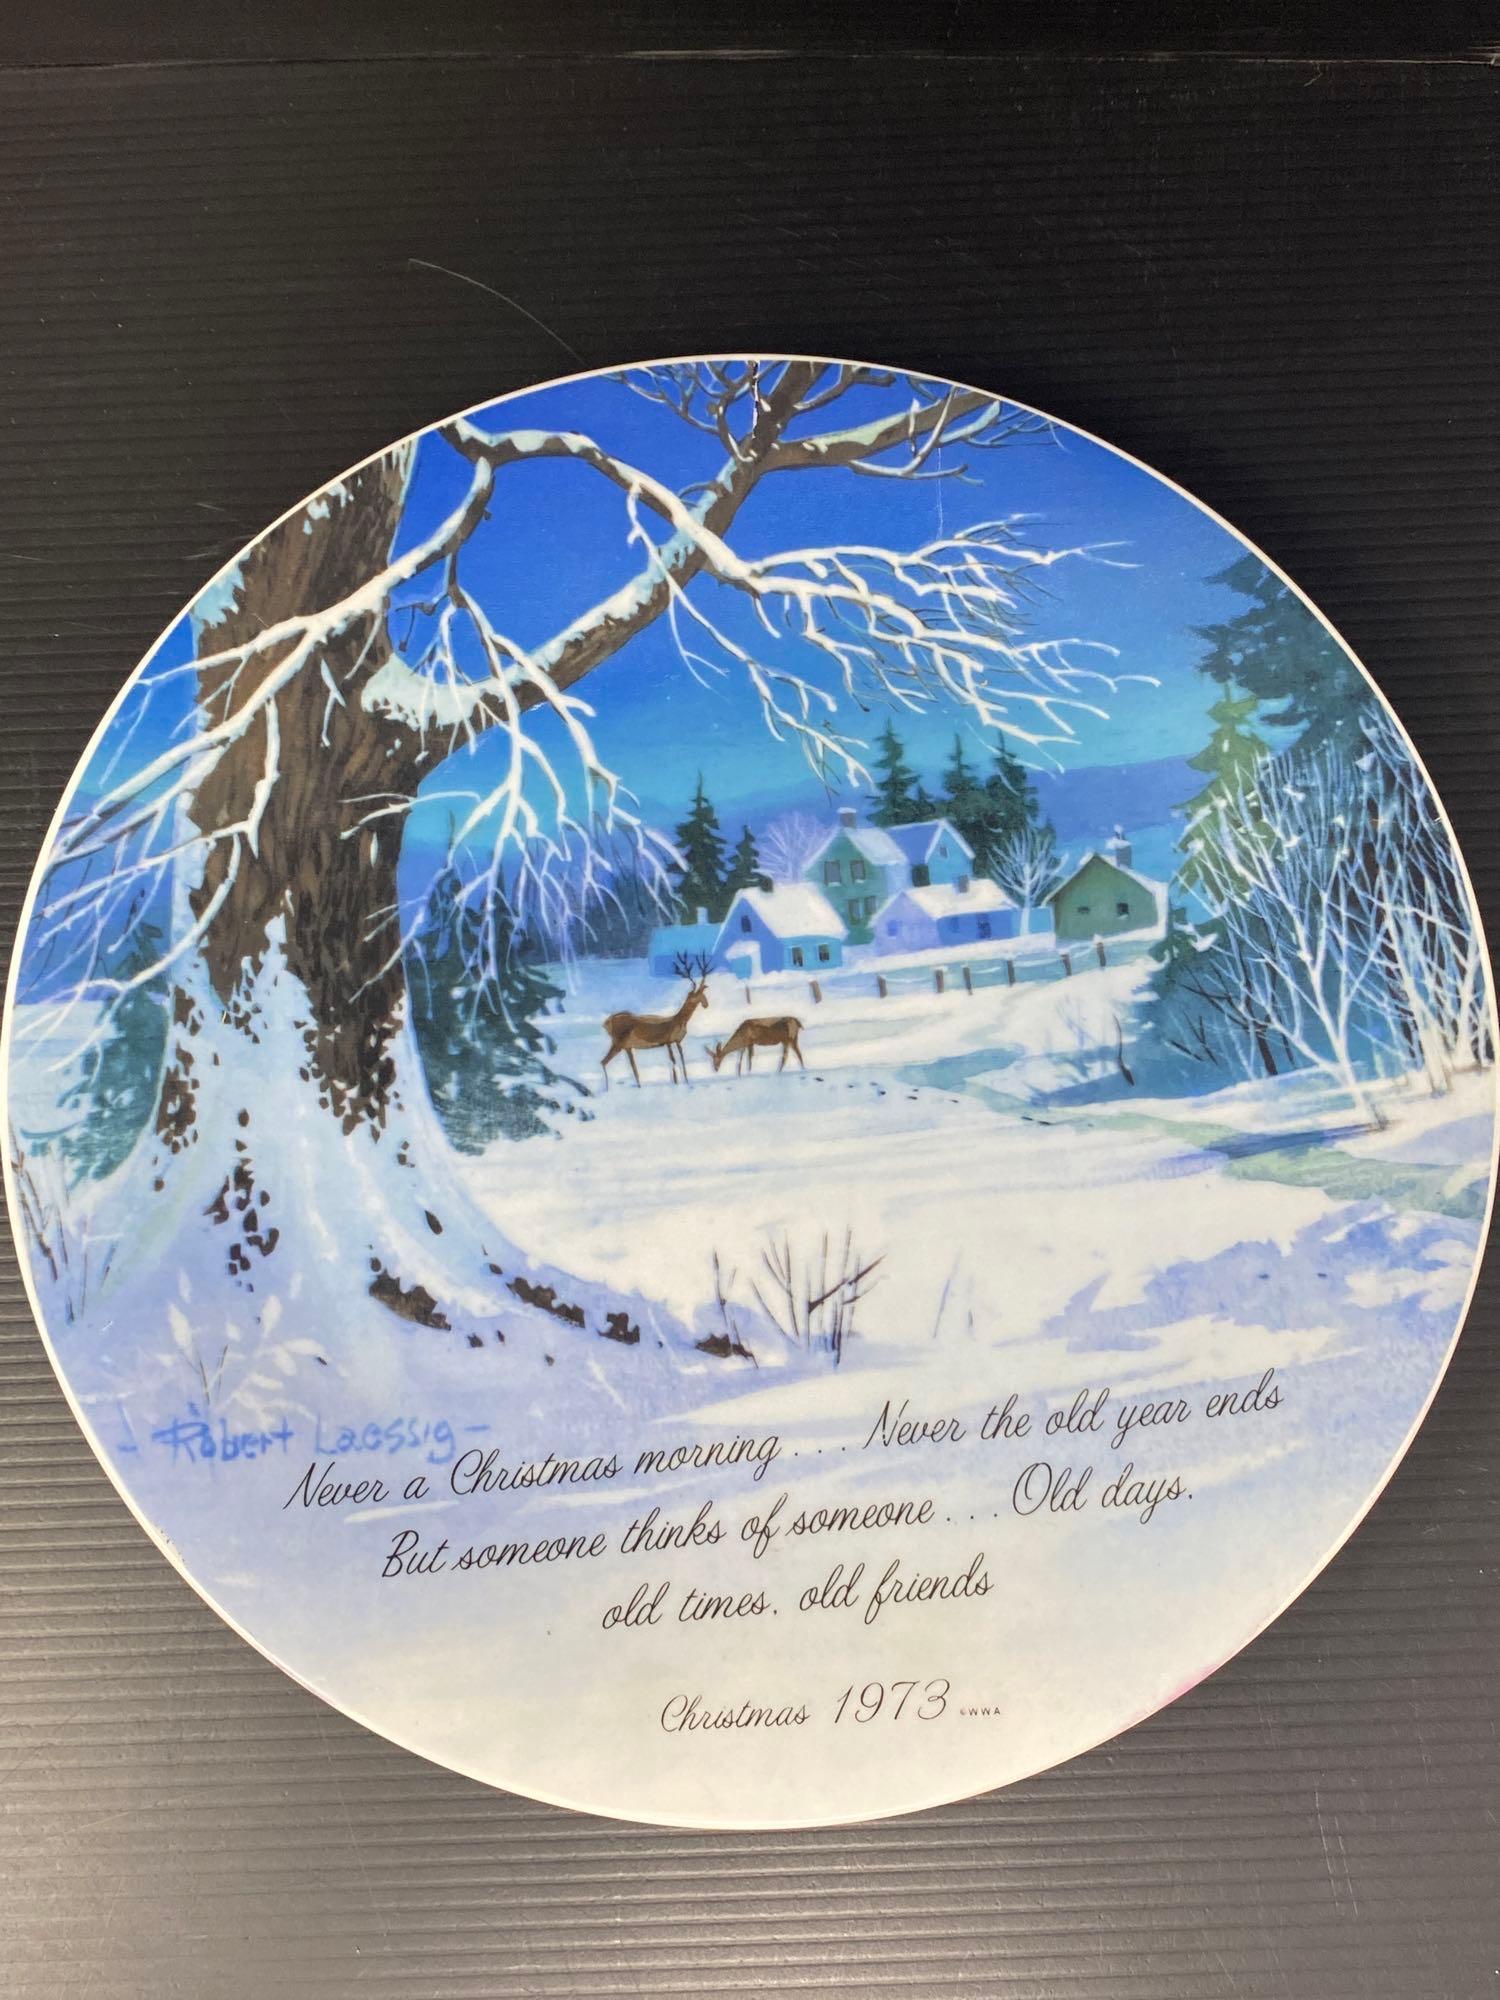 5 Decorative Plates- All Christmas/Winter Themed